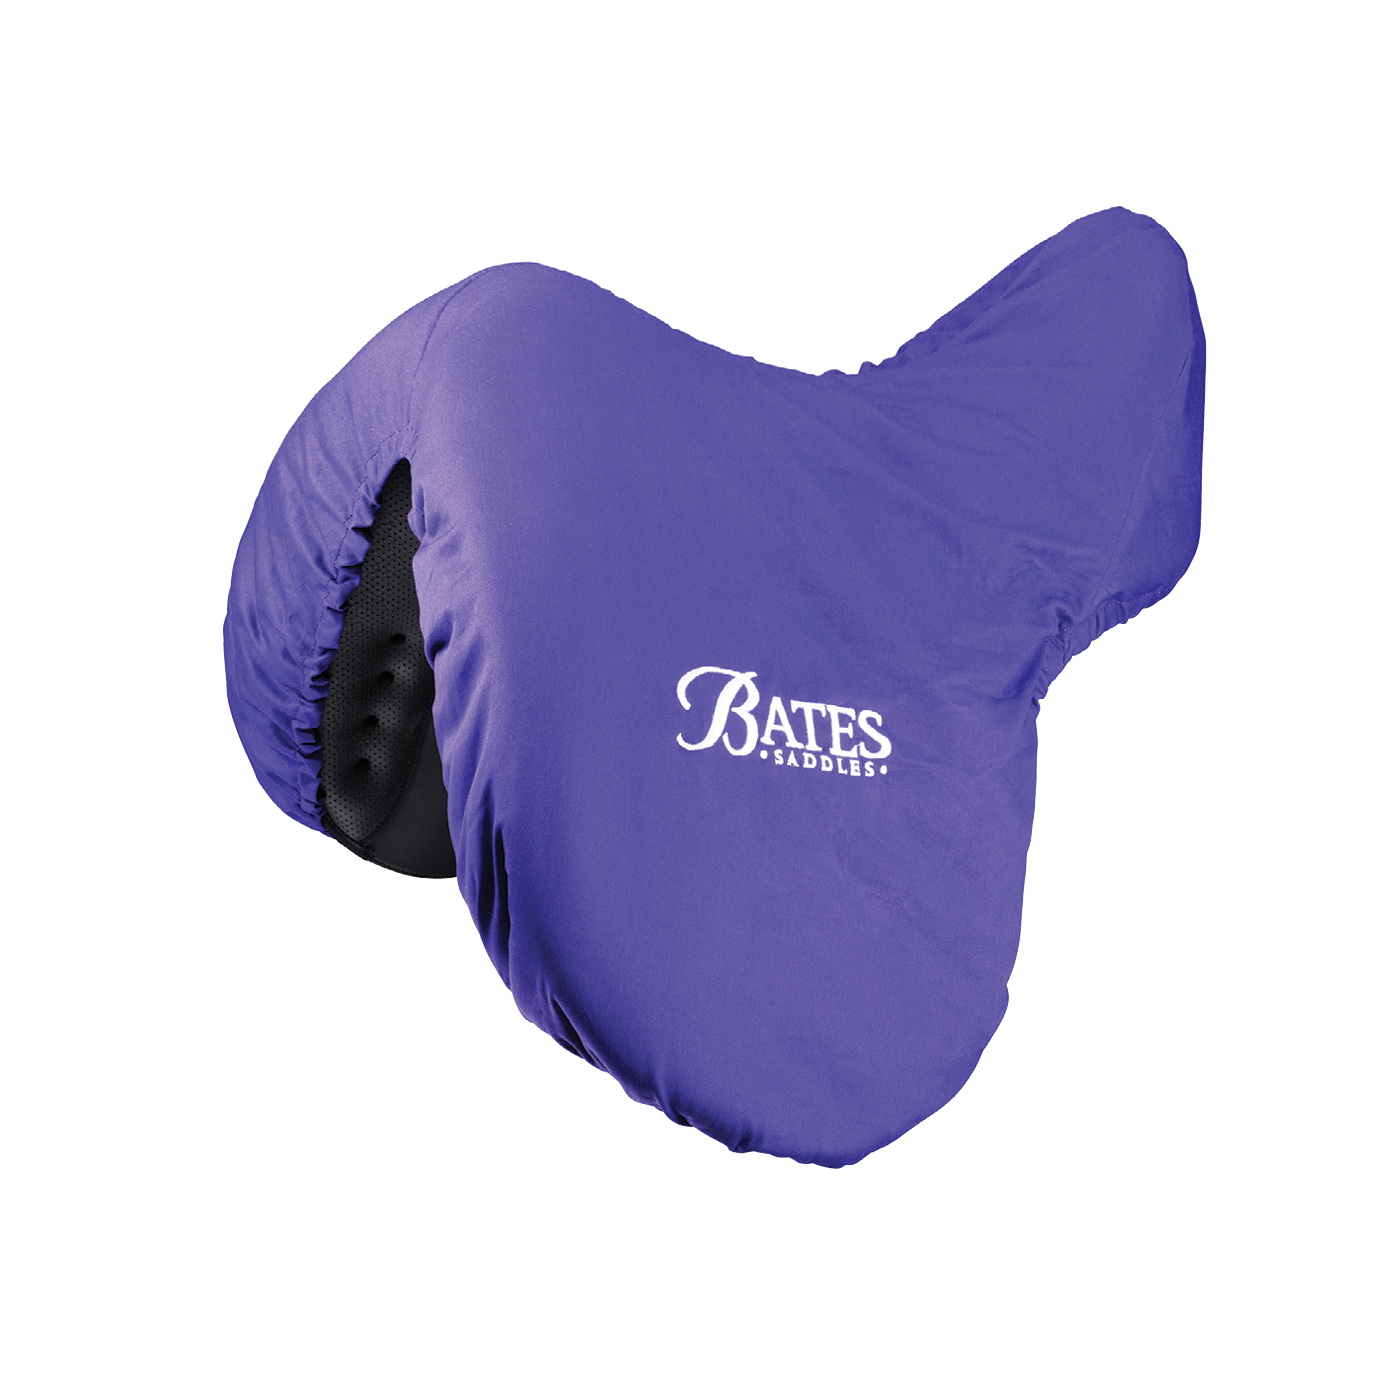 Bates Deluxe Saddle Cover - 619:32307949666340